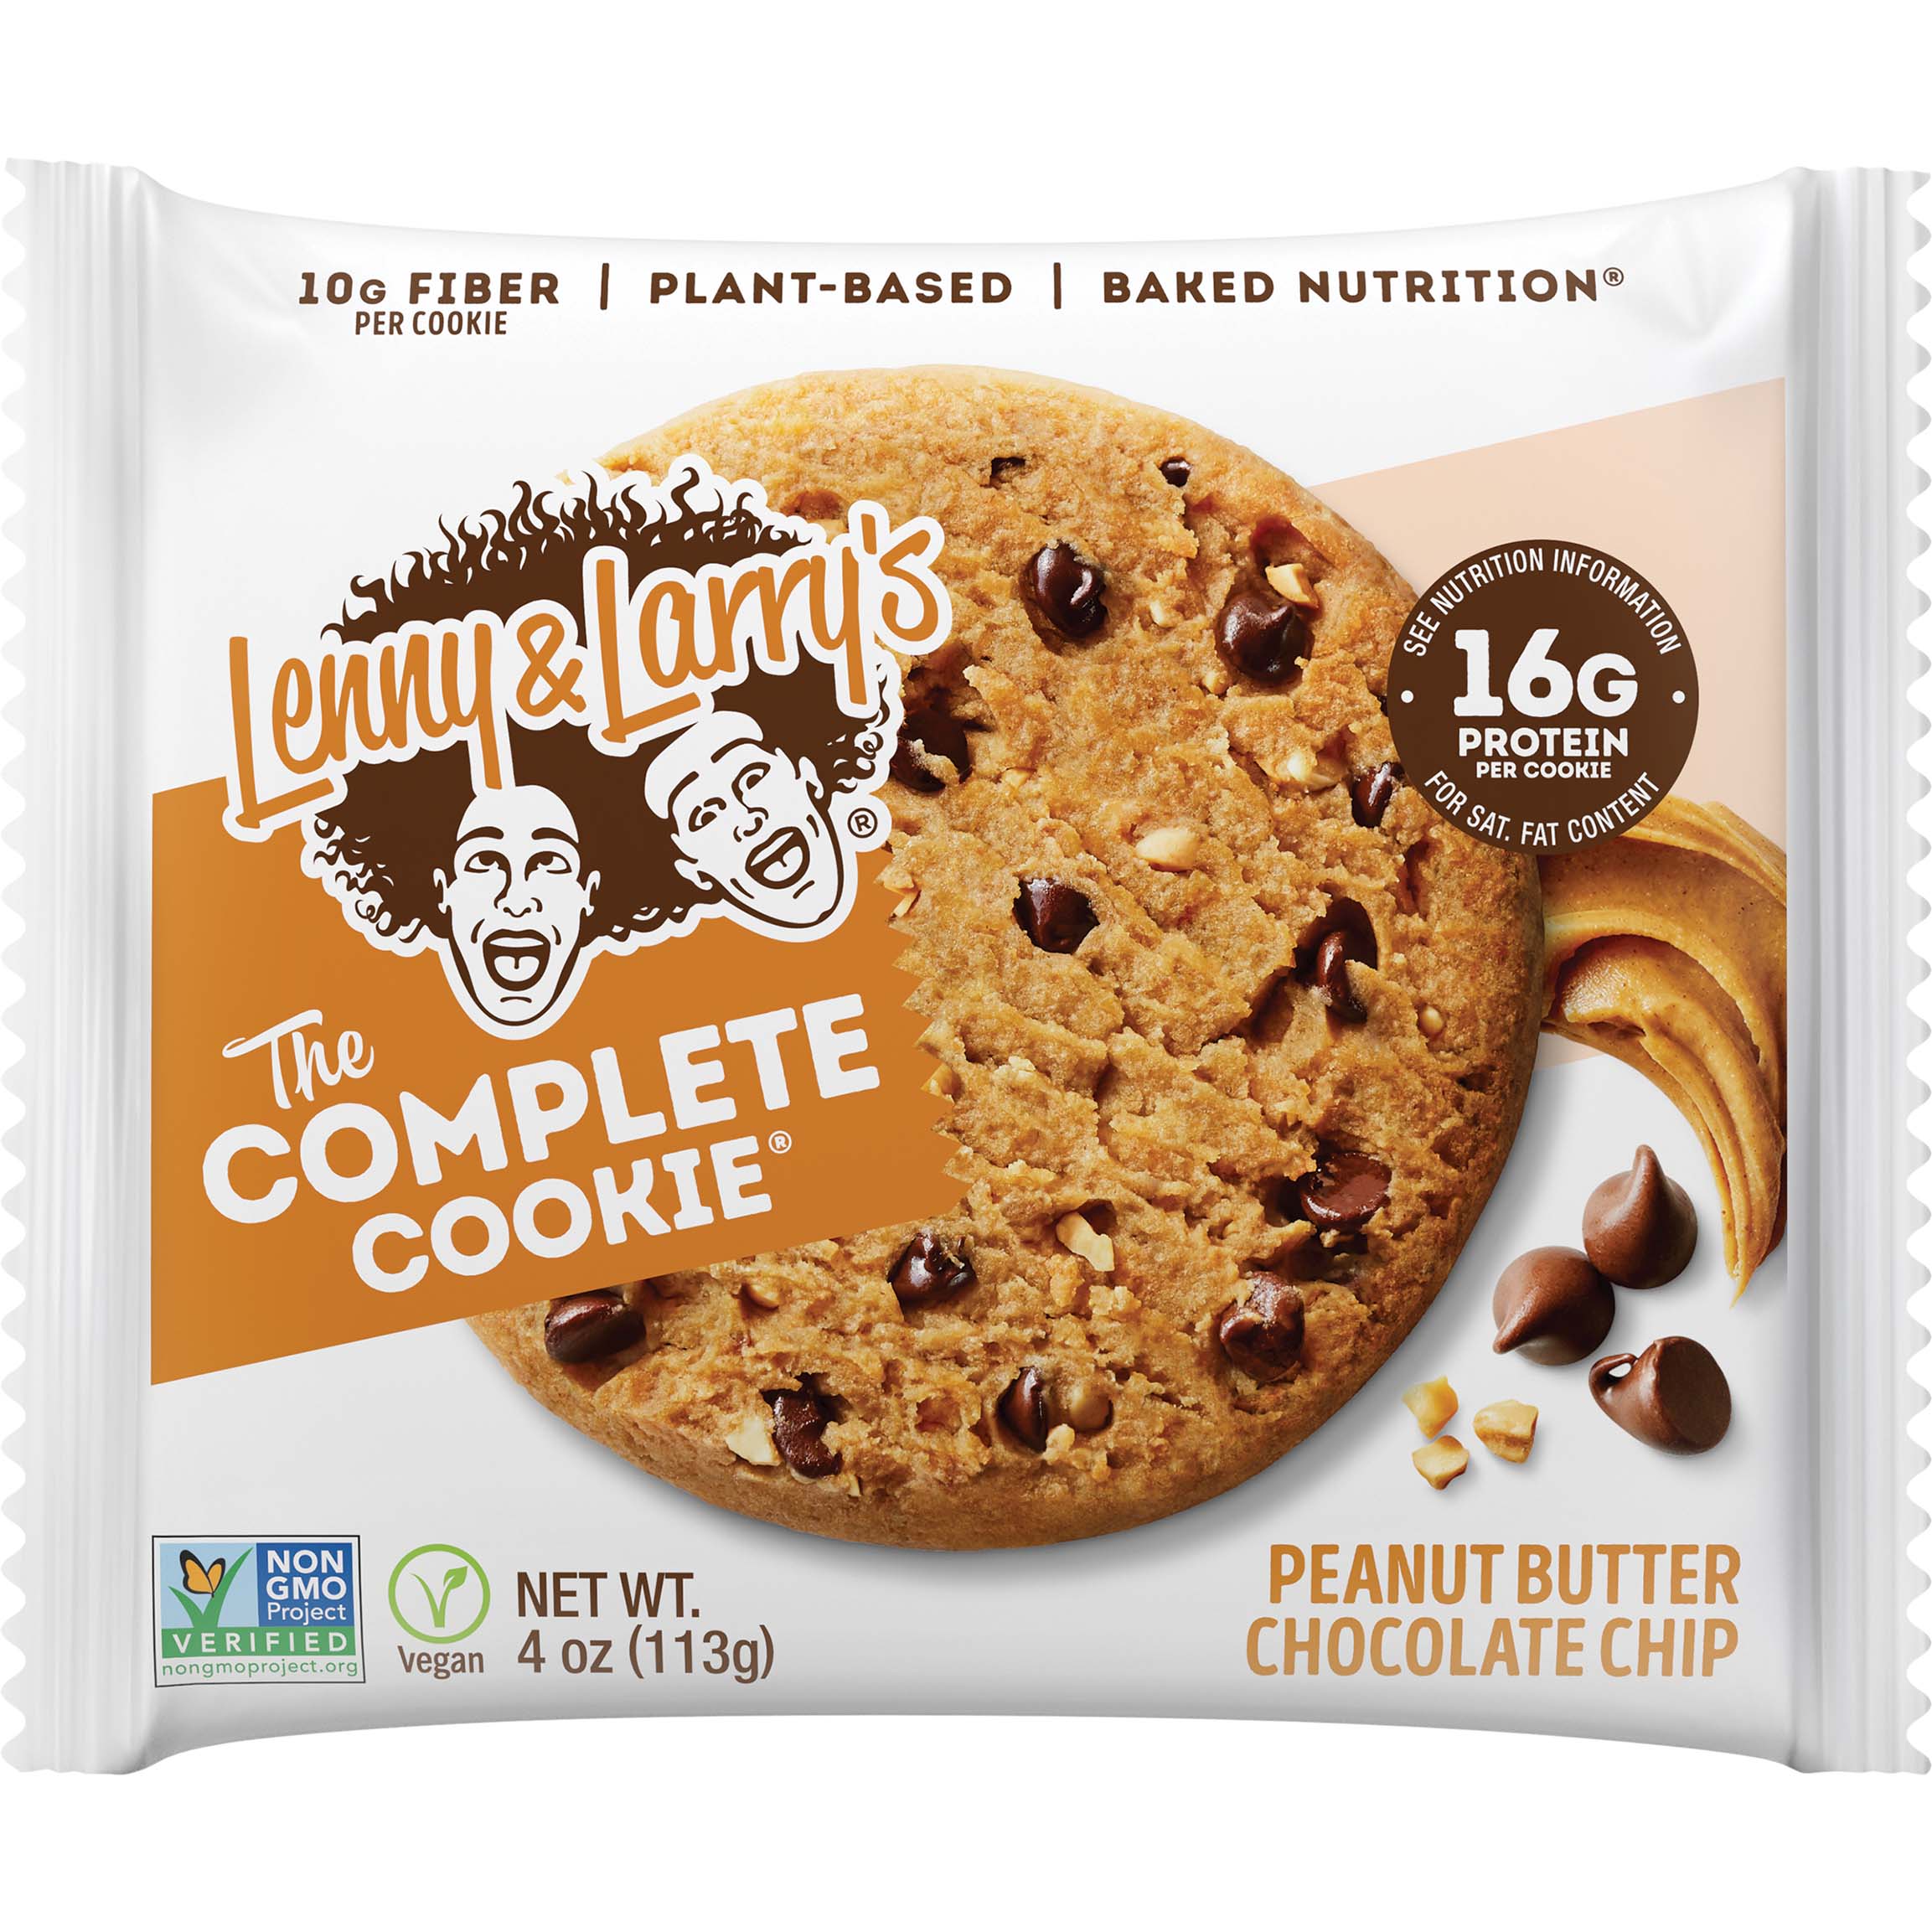 Lenny & Larry’s Complete Cookies 1 Piece Peanut Butter Choco Chip